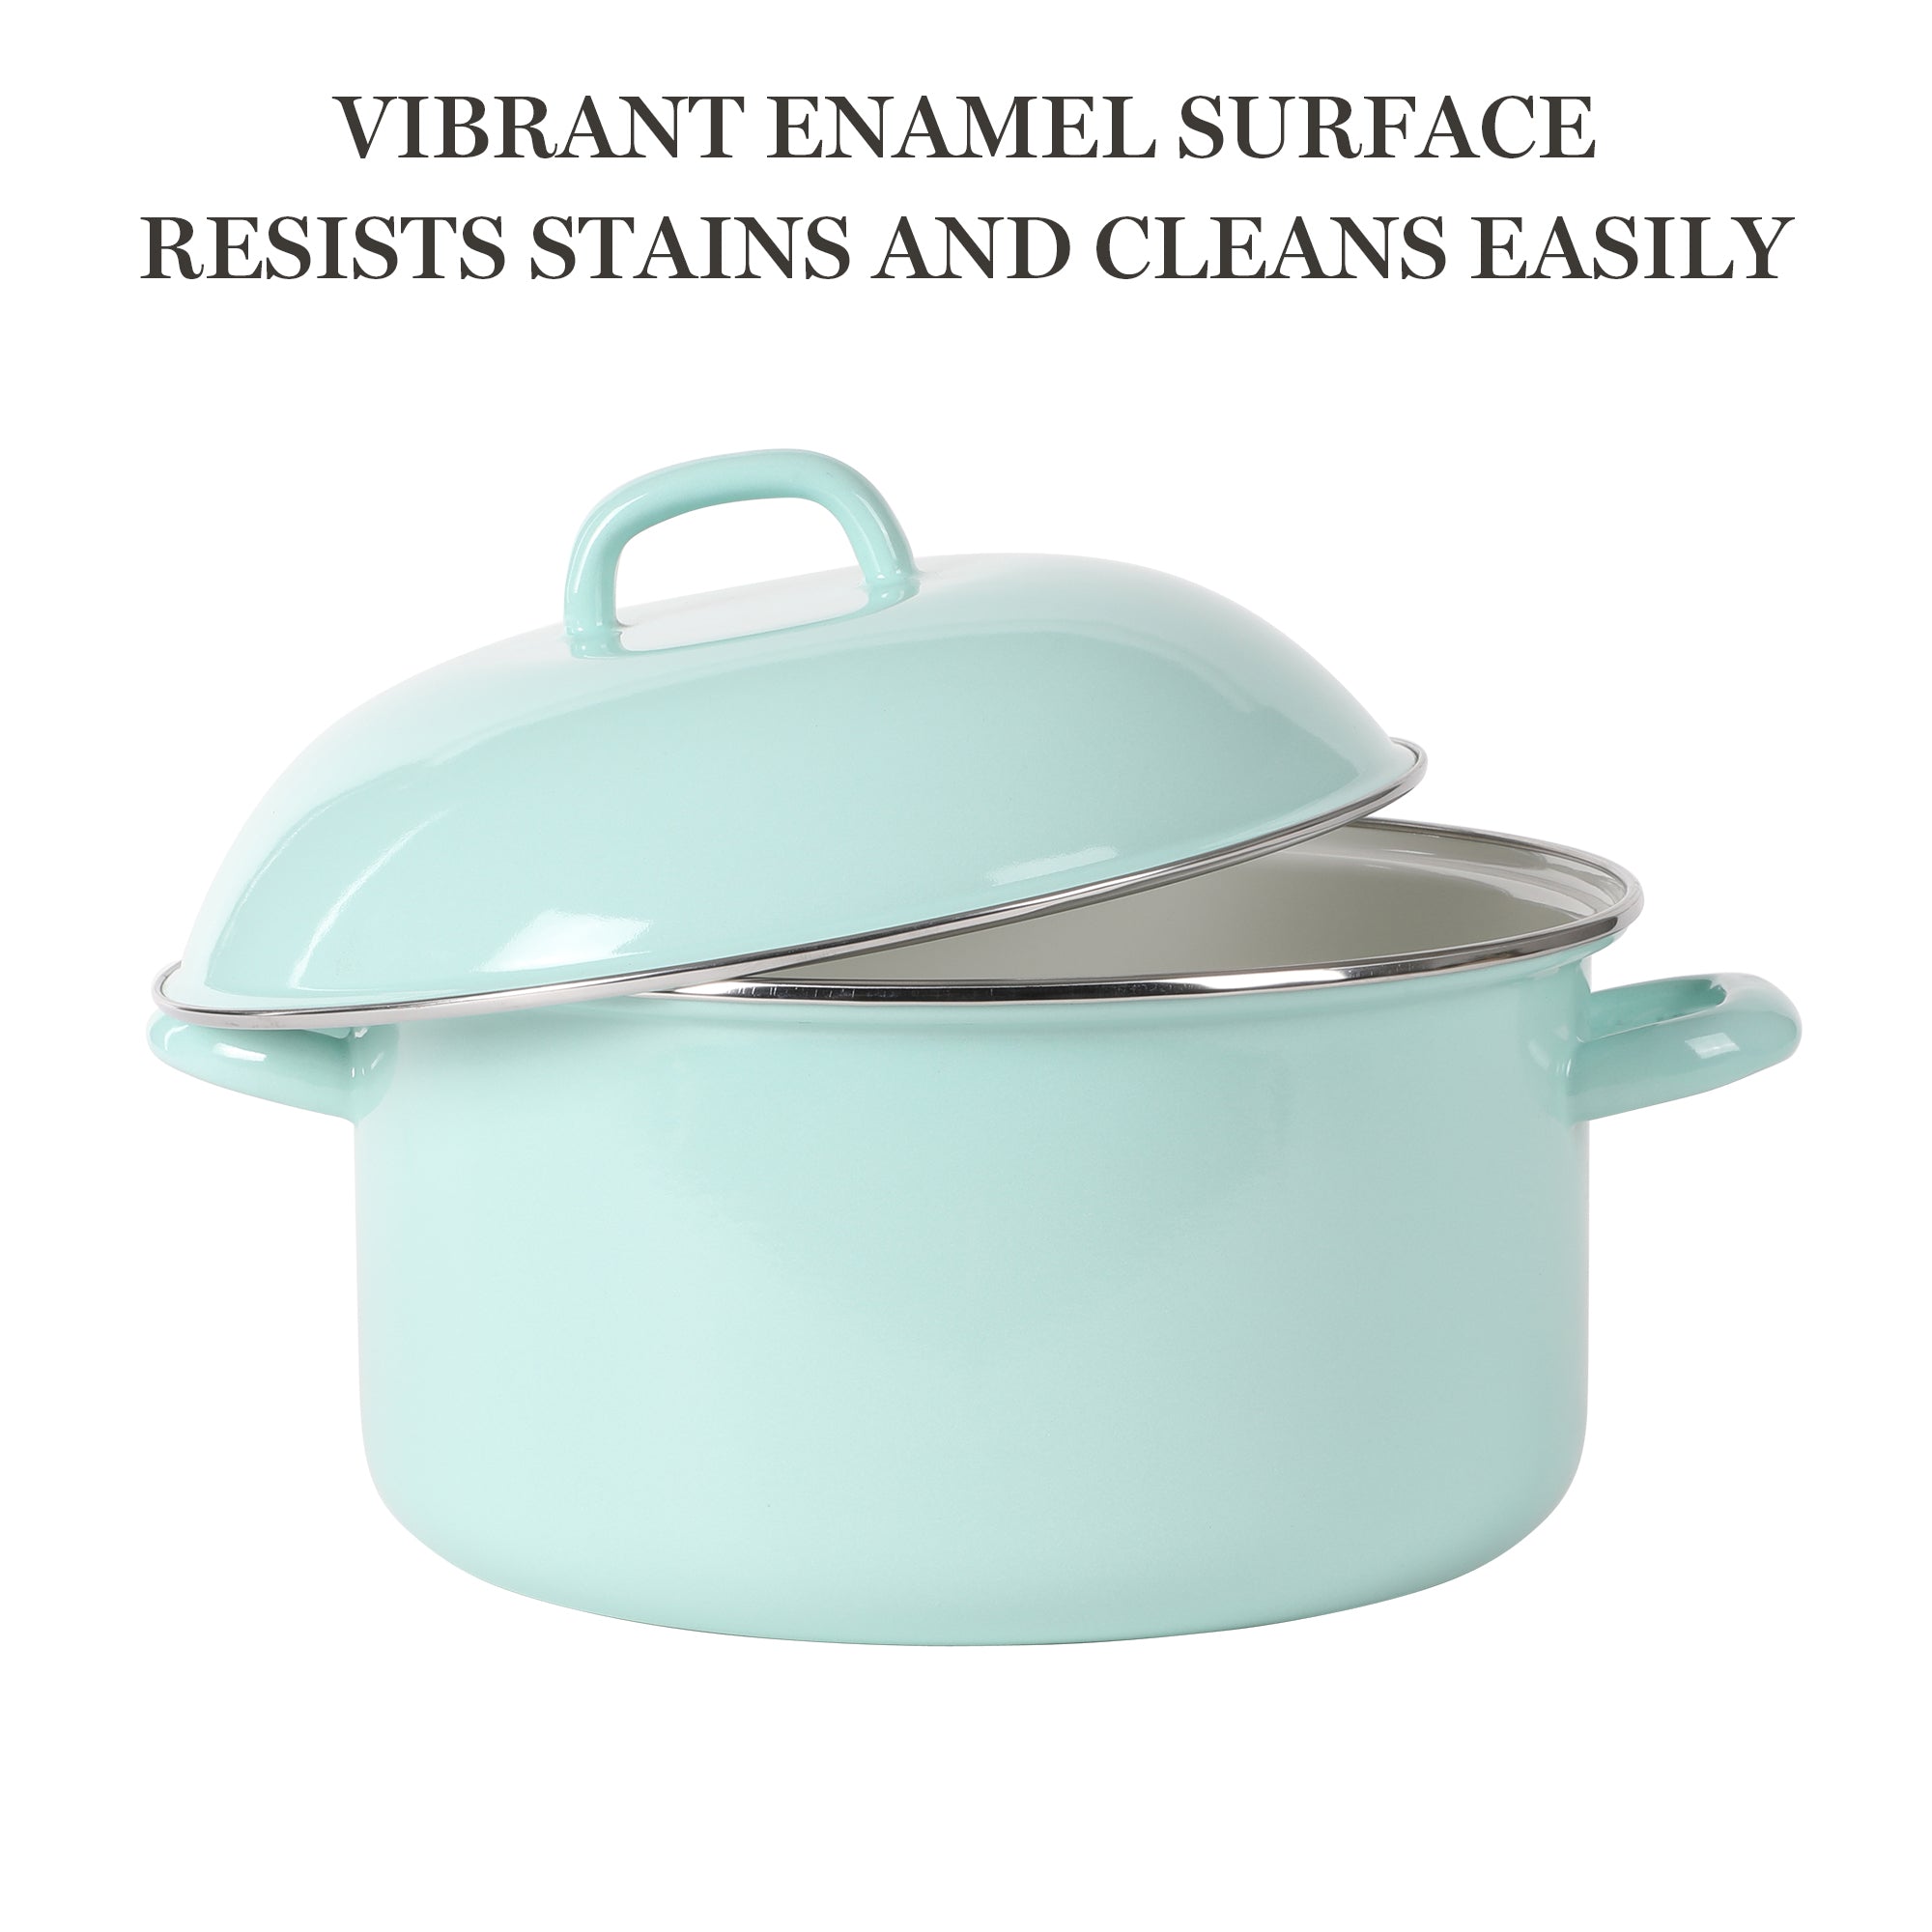 Martha Stewart Everyday 5 Quart Dutch Oven with Lid in Turquoise